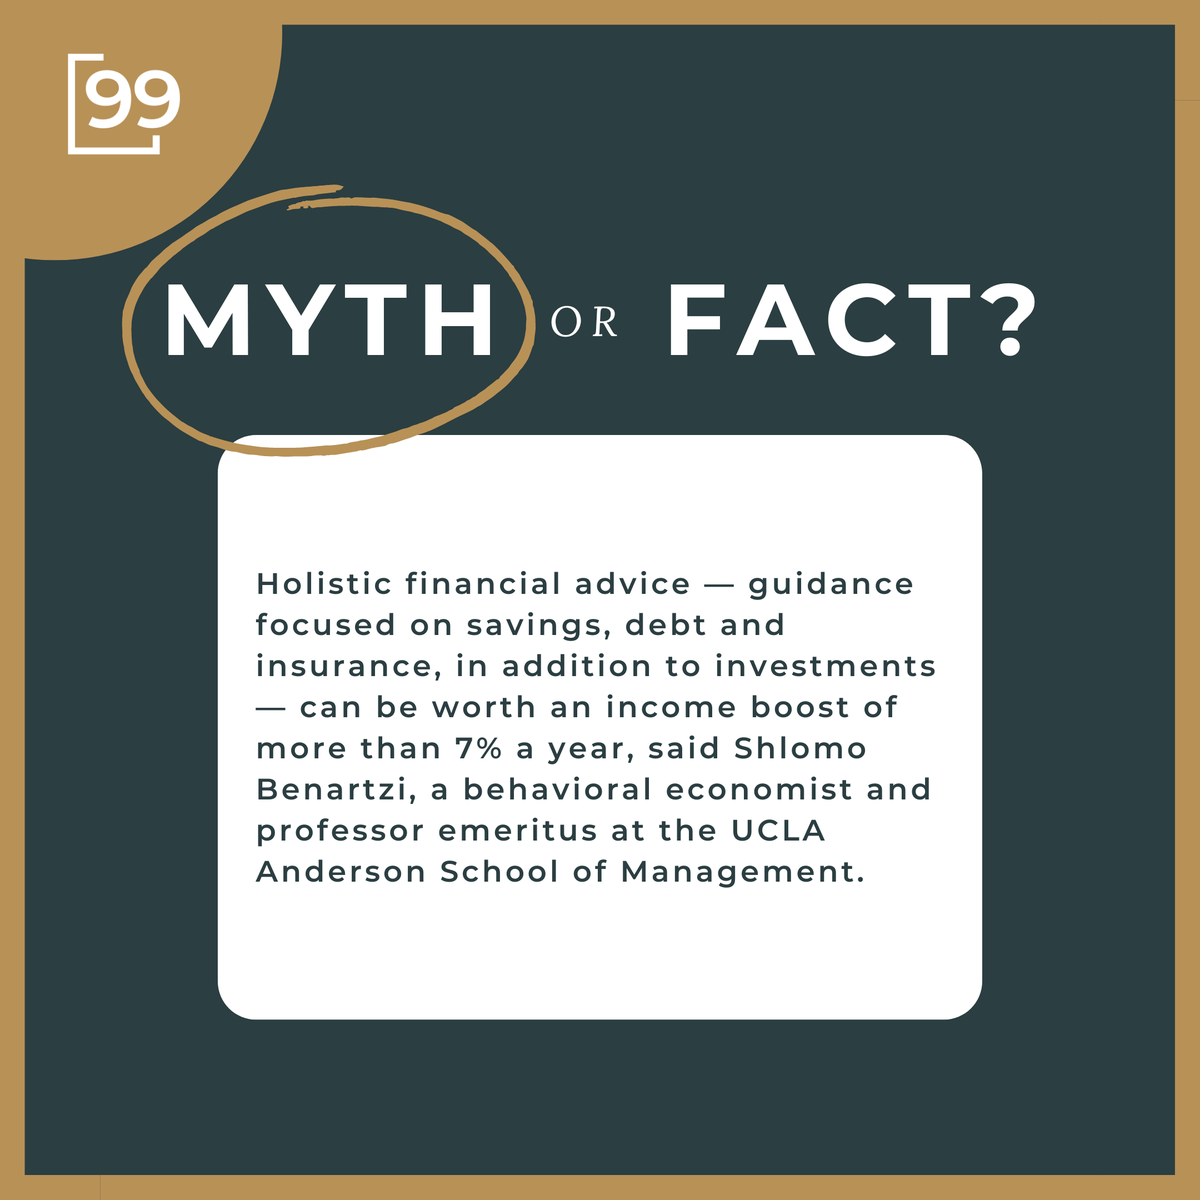 Many believe that financial advisors are exclusively for the affluent. Fact: Holistic financial advice extends beyond investments and benefits everyone, regardless of income level. 
-
-
-
#BuildingEconomicSecurity #MythVsFact #FinancialAdvisor #FinancialWellbeing #UnlockPotential